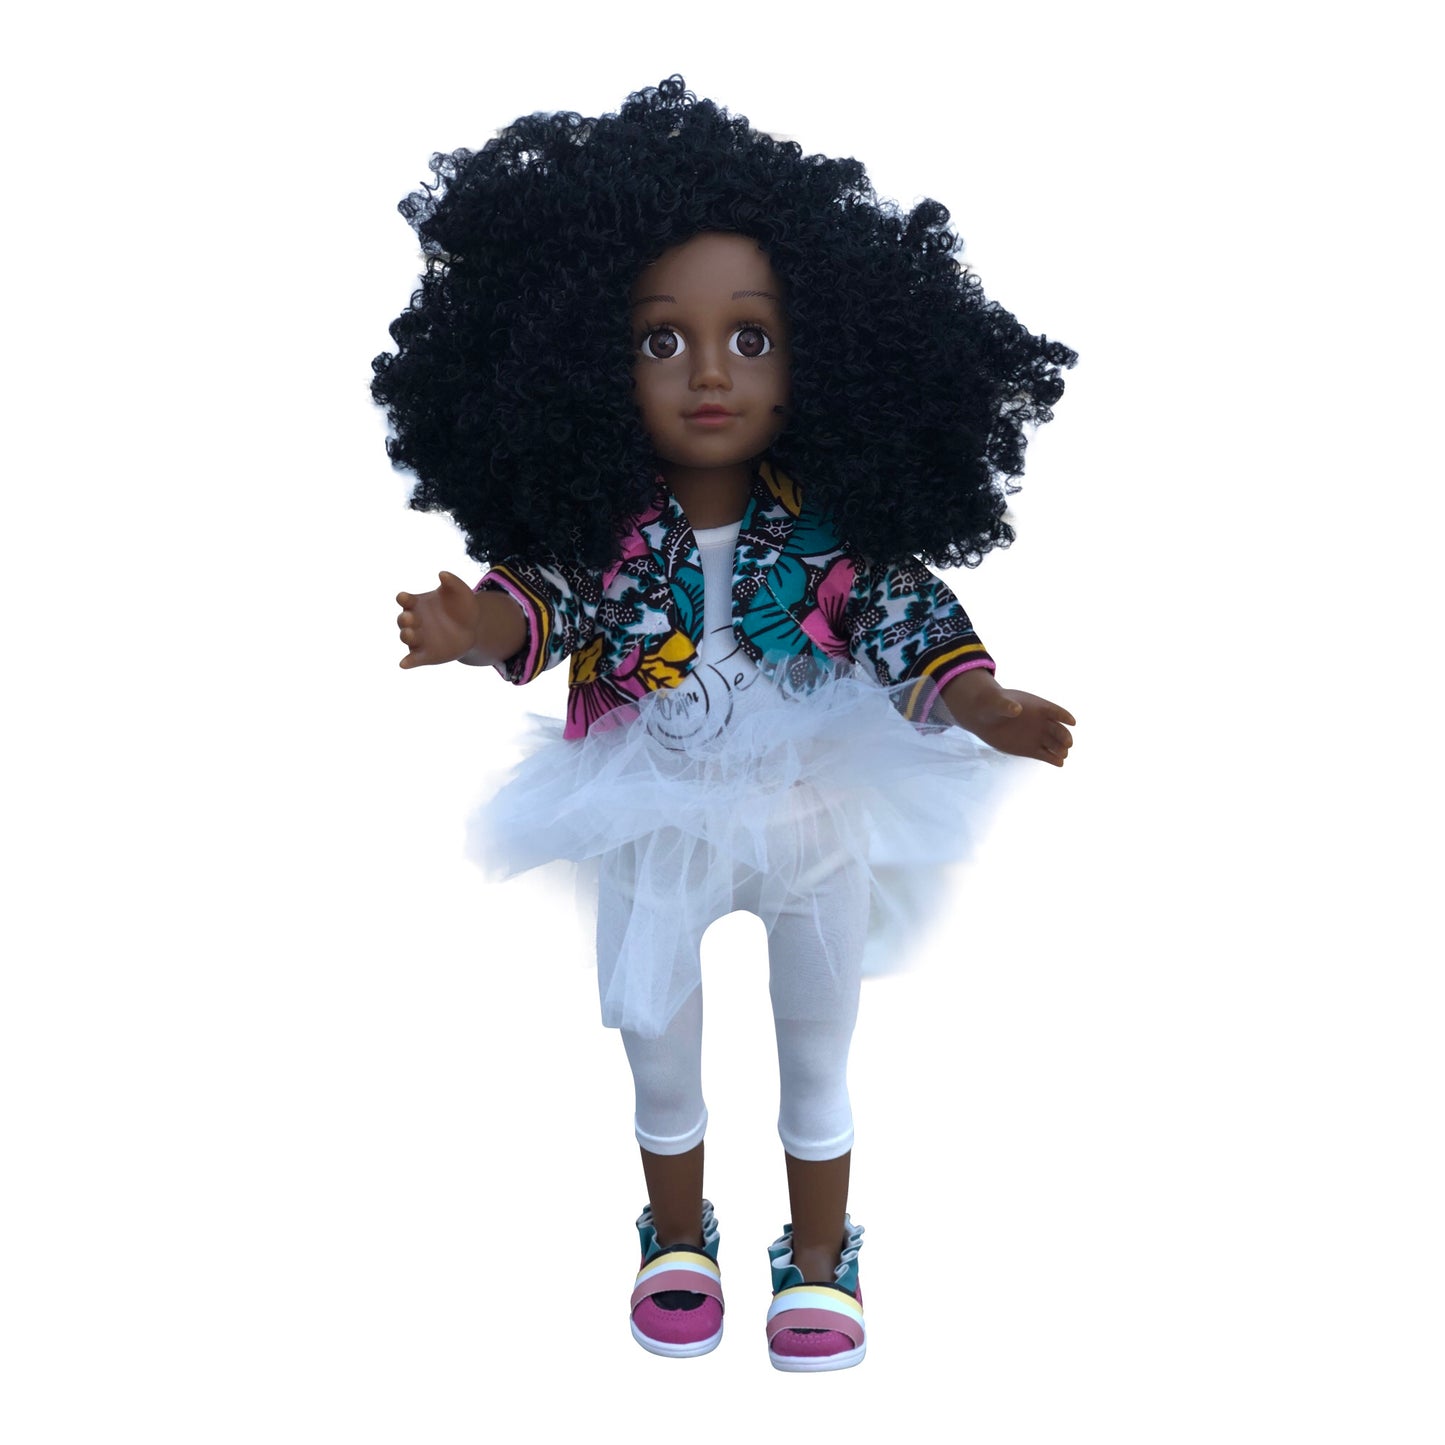 Curl Girlfriend Laila -  African American Black Latino Hispanic Biracial Multicultural Curly Natural Hair 18 inch Fashion Doll